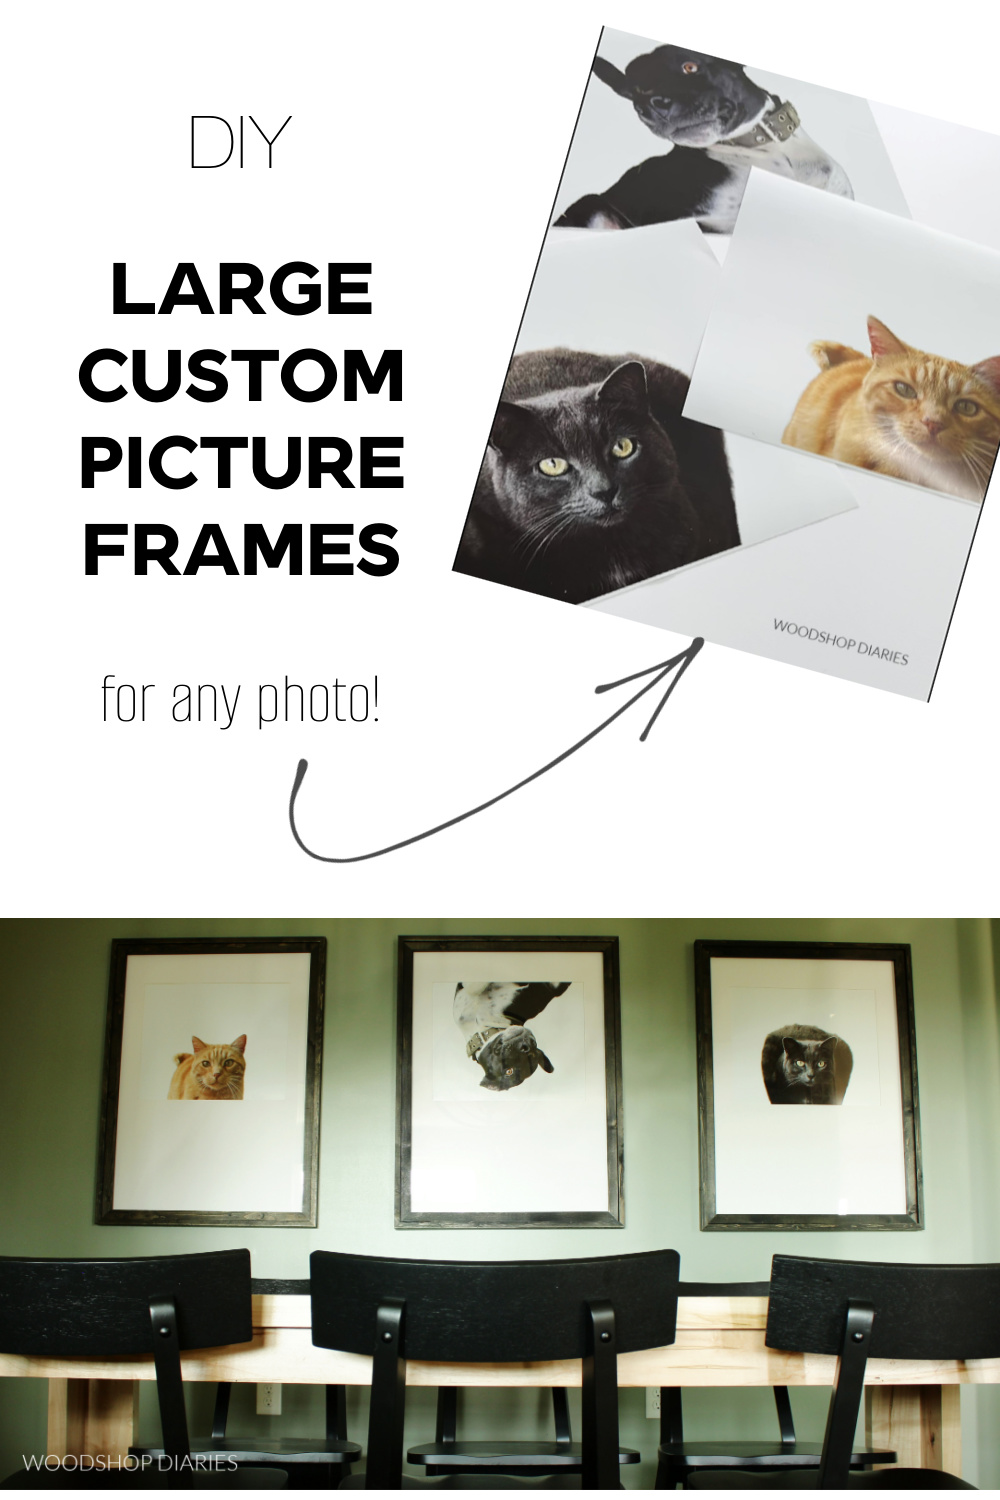 Pinterest collage image showing pet photos at top and completed custom picture frames at bottom with text "DIY large custom picture frames for any photo